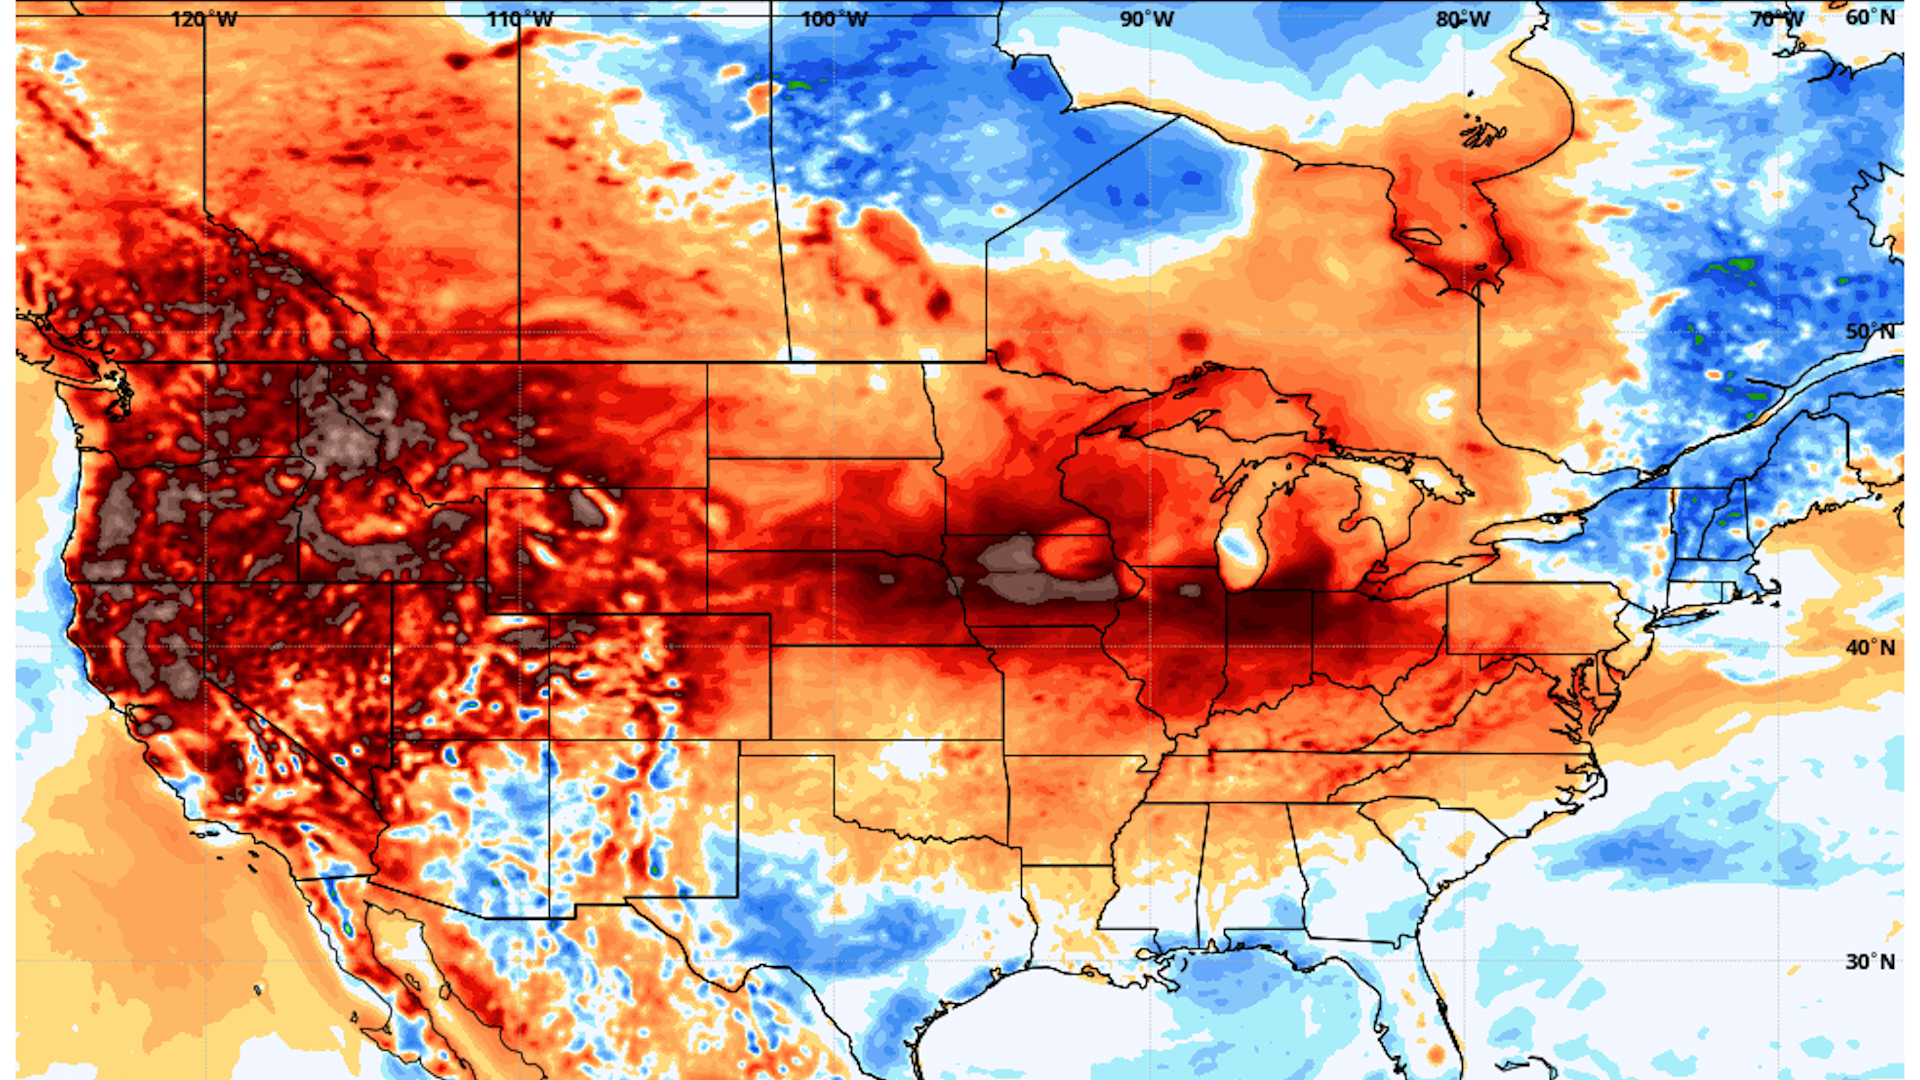 Map showing red hues covering the U.S. and parts of Canada as another heat wave hits the region.